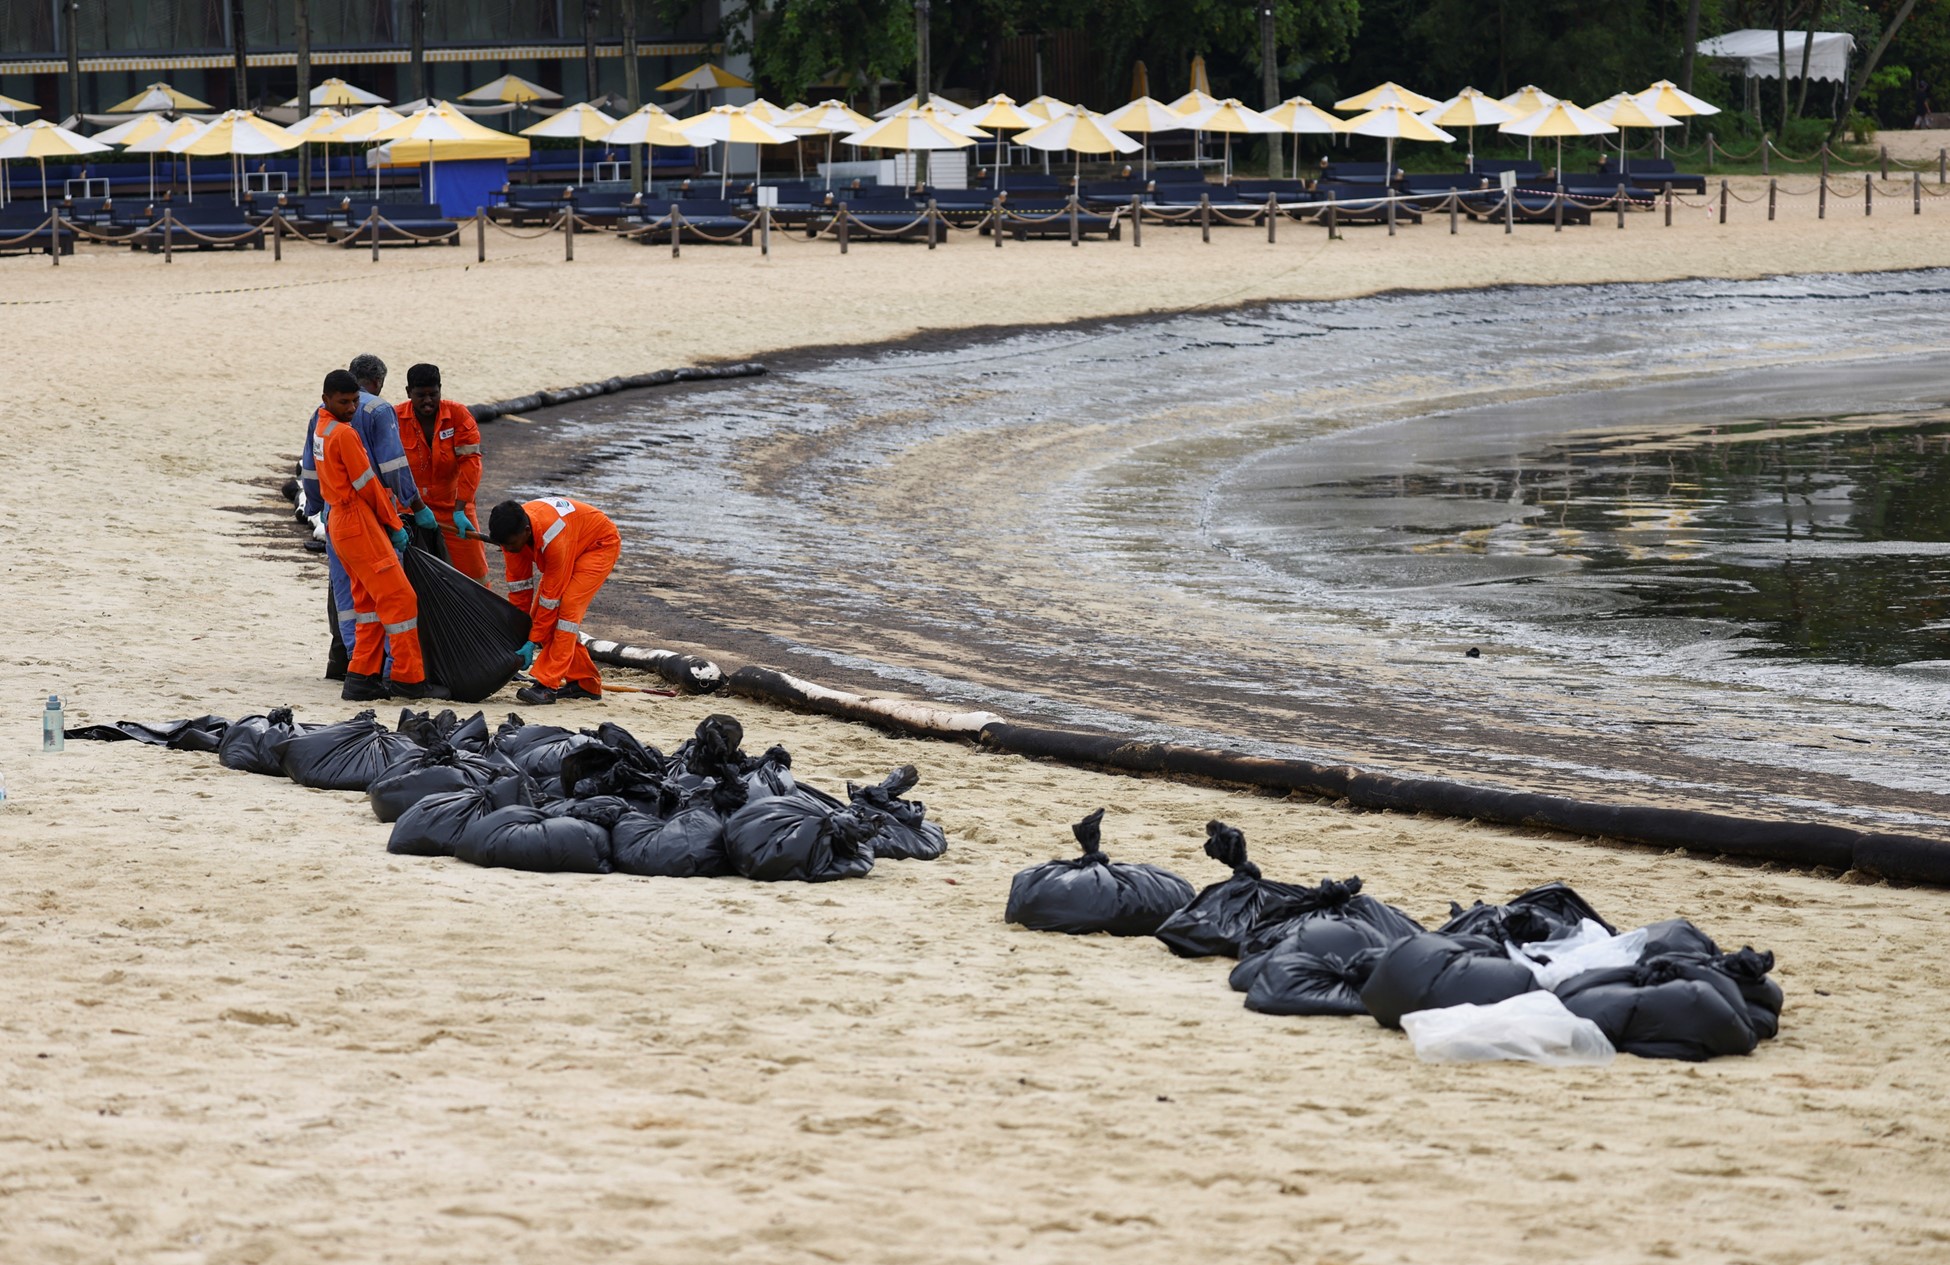 Singapore intensifies oil spill clean up after it spreads along coast